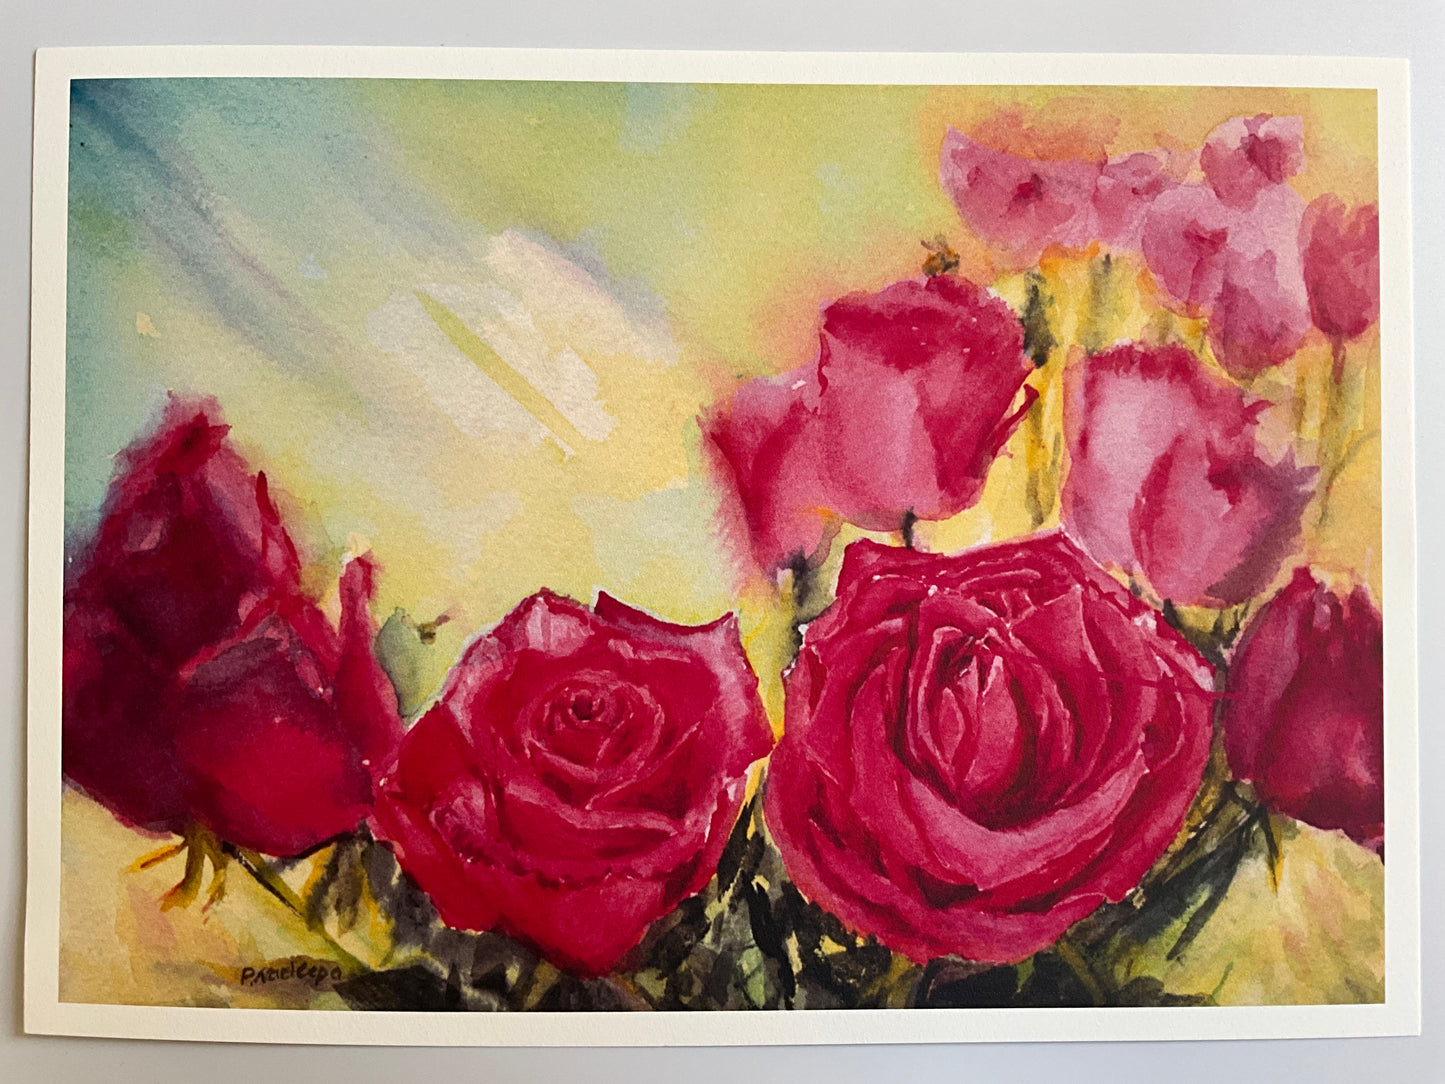 Roses roses everywhere - Limited edition print